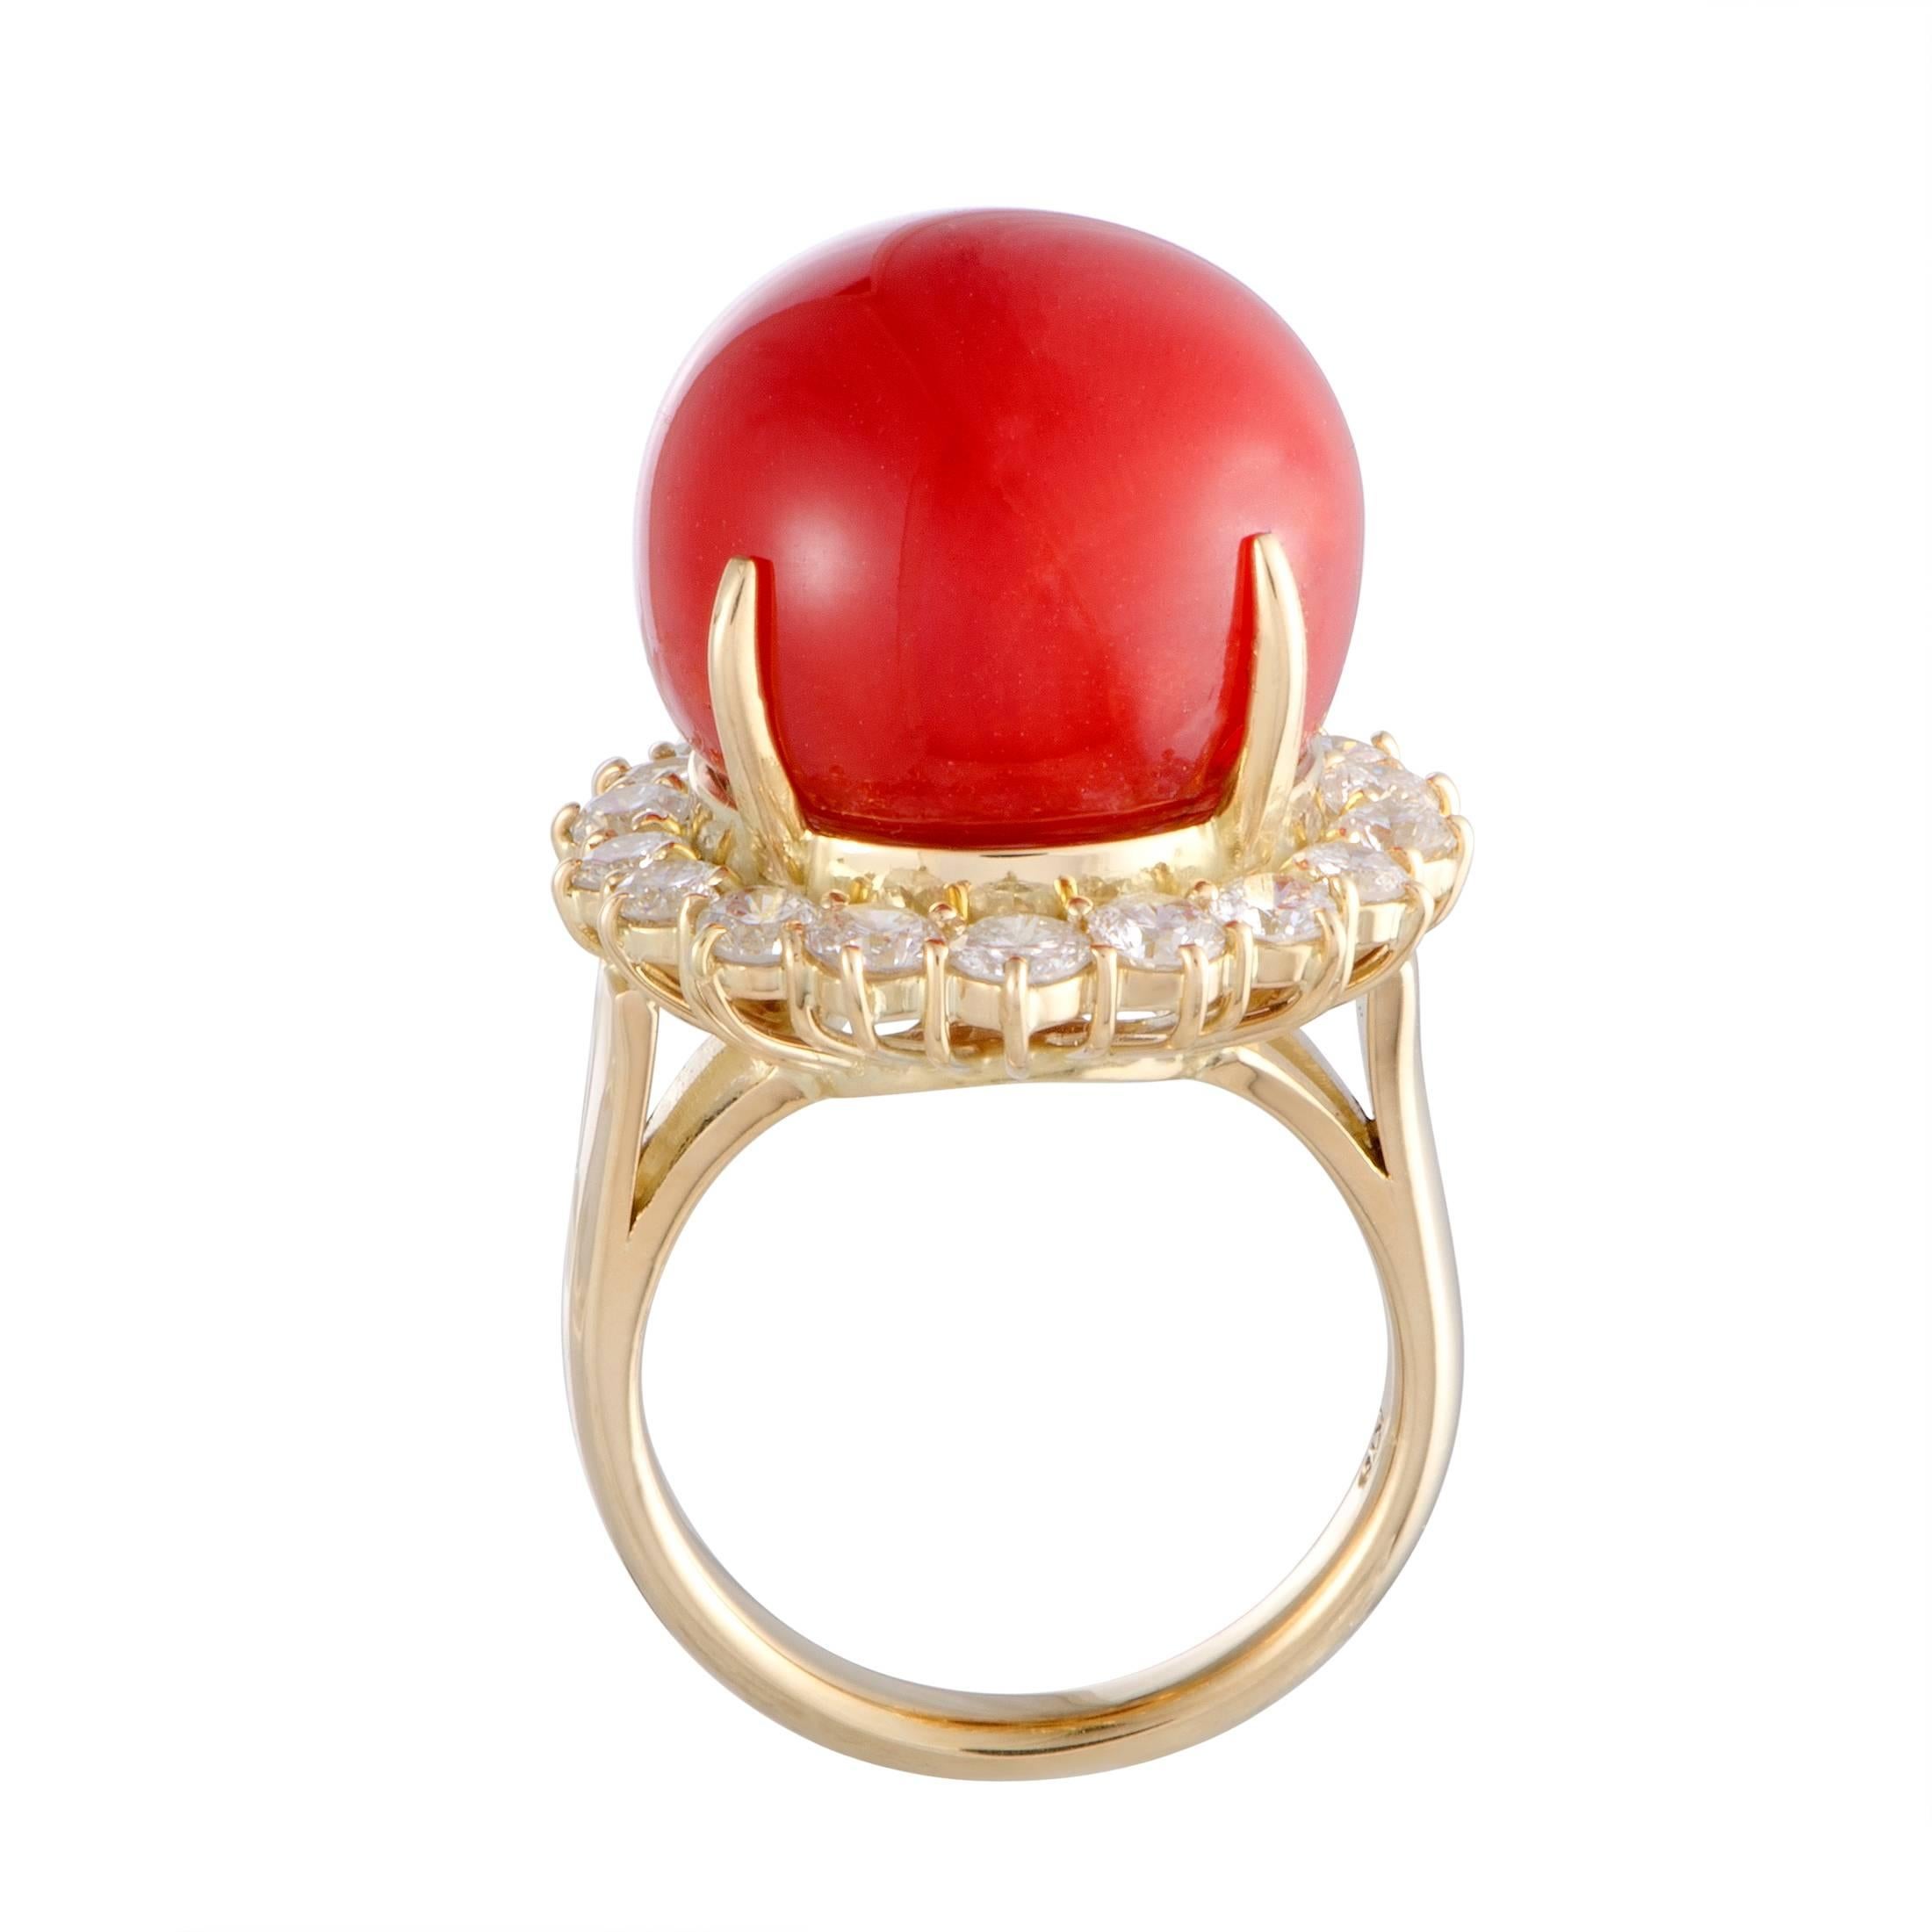 The captivating red coral and the endearingly gleaming 18K yellow gold complement one another magnificently in this superb ring that also boasts 1.85 carats of exquisitely cut diamond stones.
Ring Top Dimensions: 20mm x 20mm
Band: 3mm
Top: 20mm
Ring